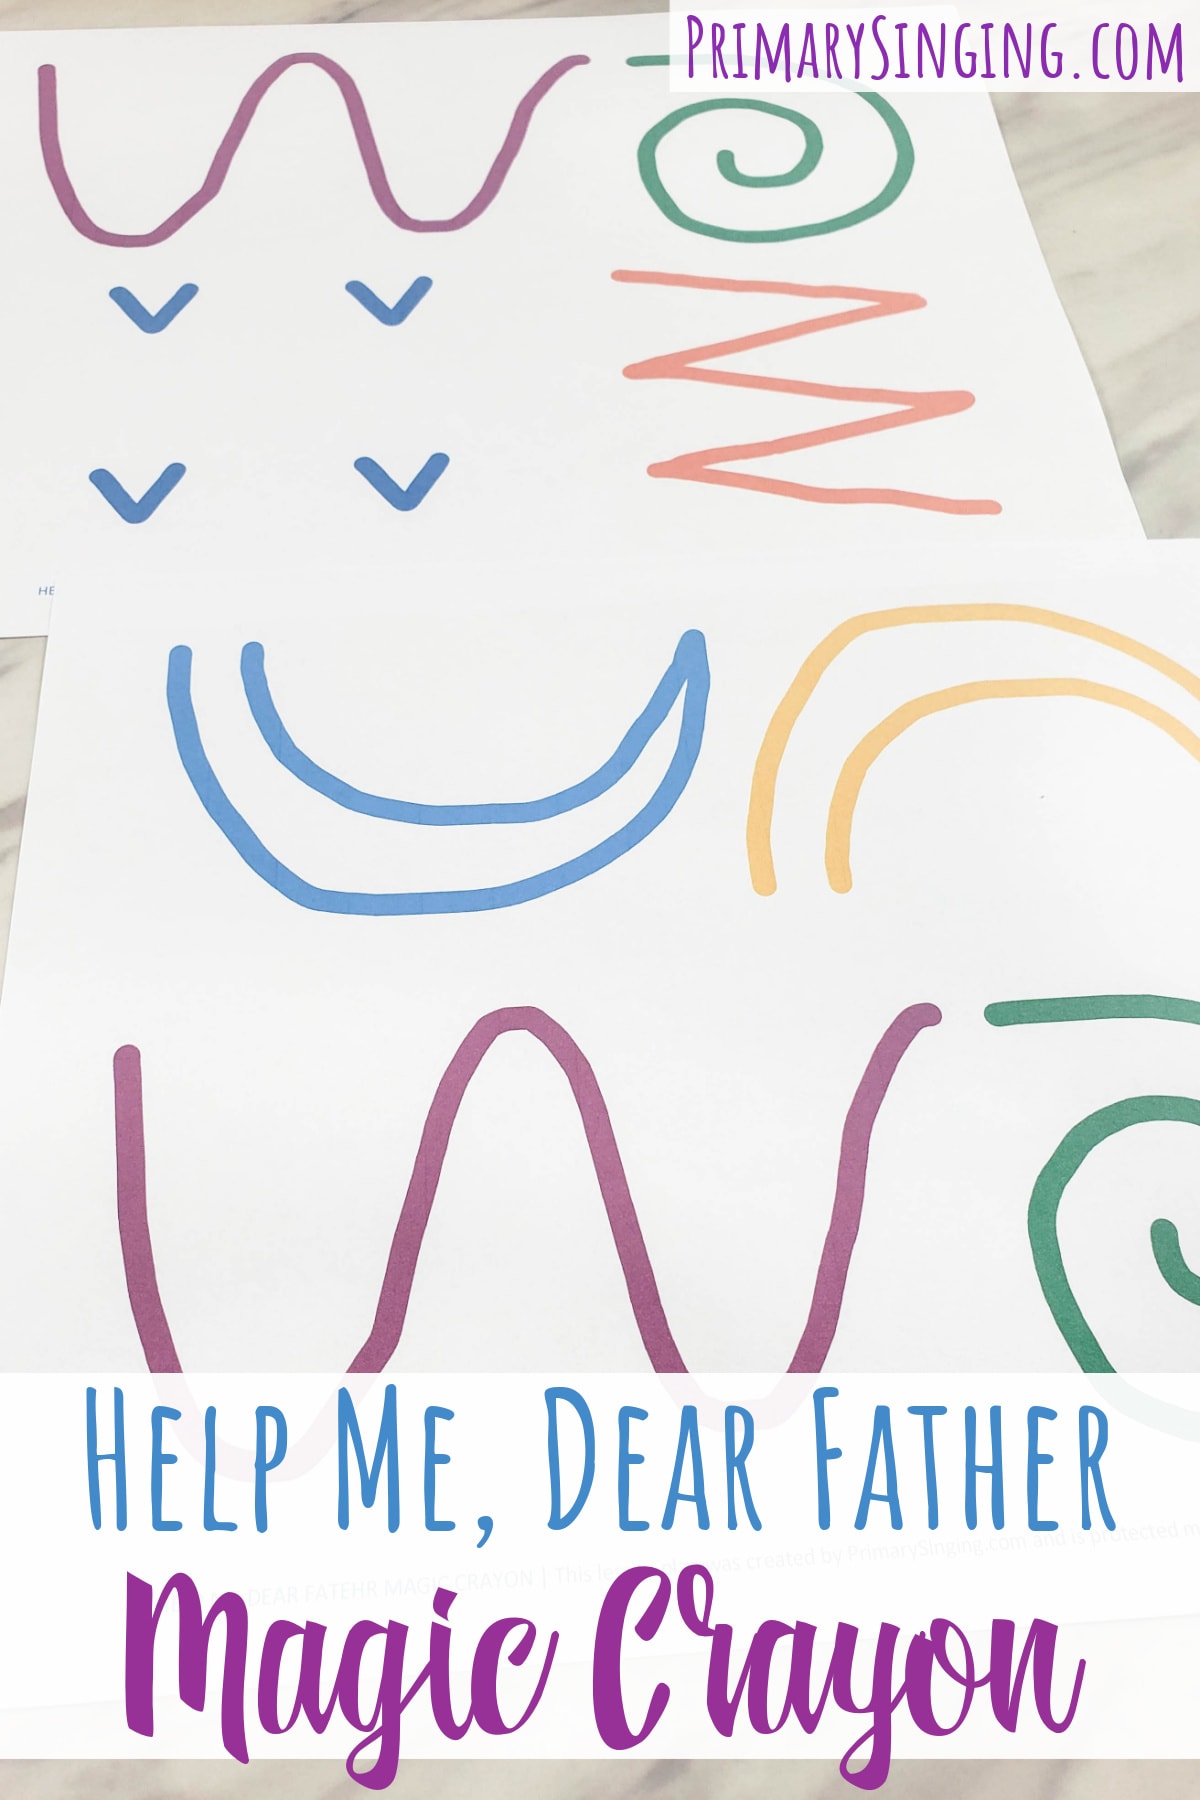 Help Me Dear Father Magic Crayon singing time ideas to paint the song in the air with these fun movement shapes to follow. Includes free printable song helps for LDS Primary music leaders teaching this song.